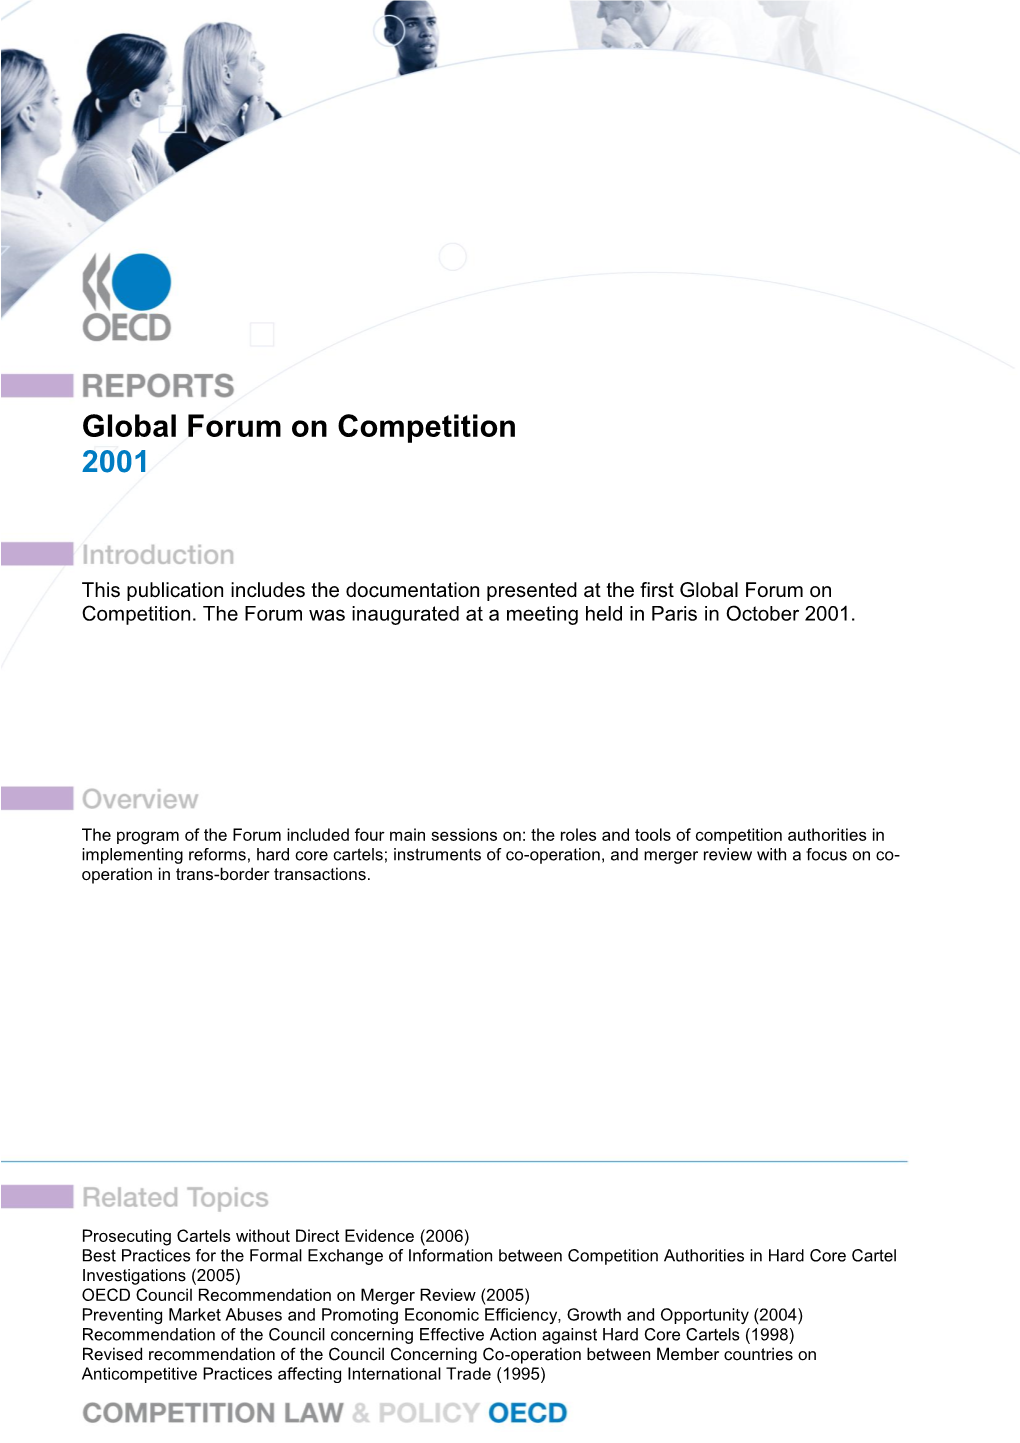 Global Forum on Competition 2001